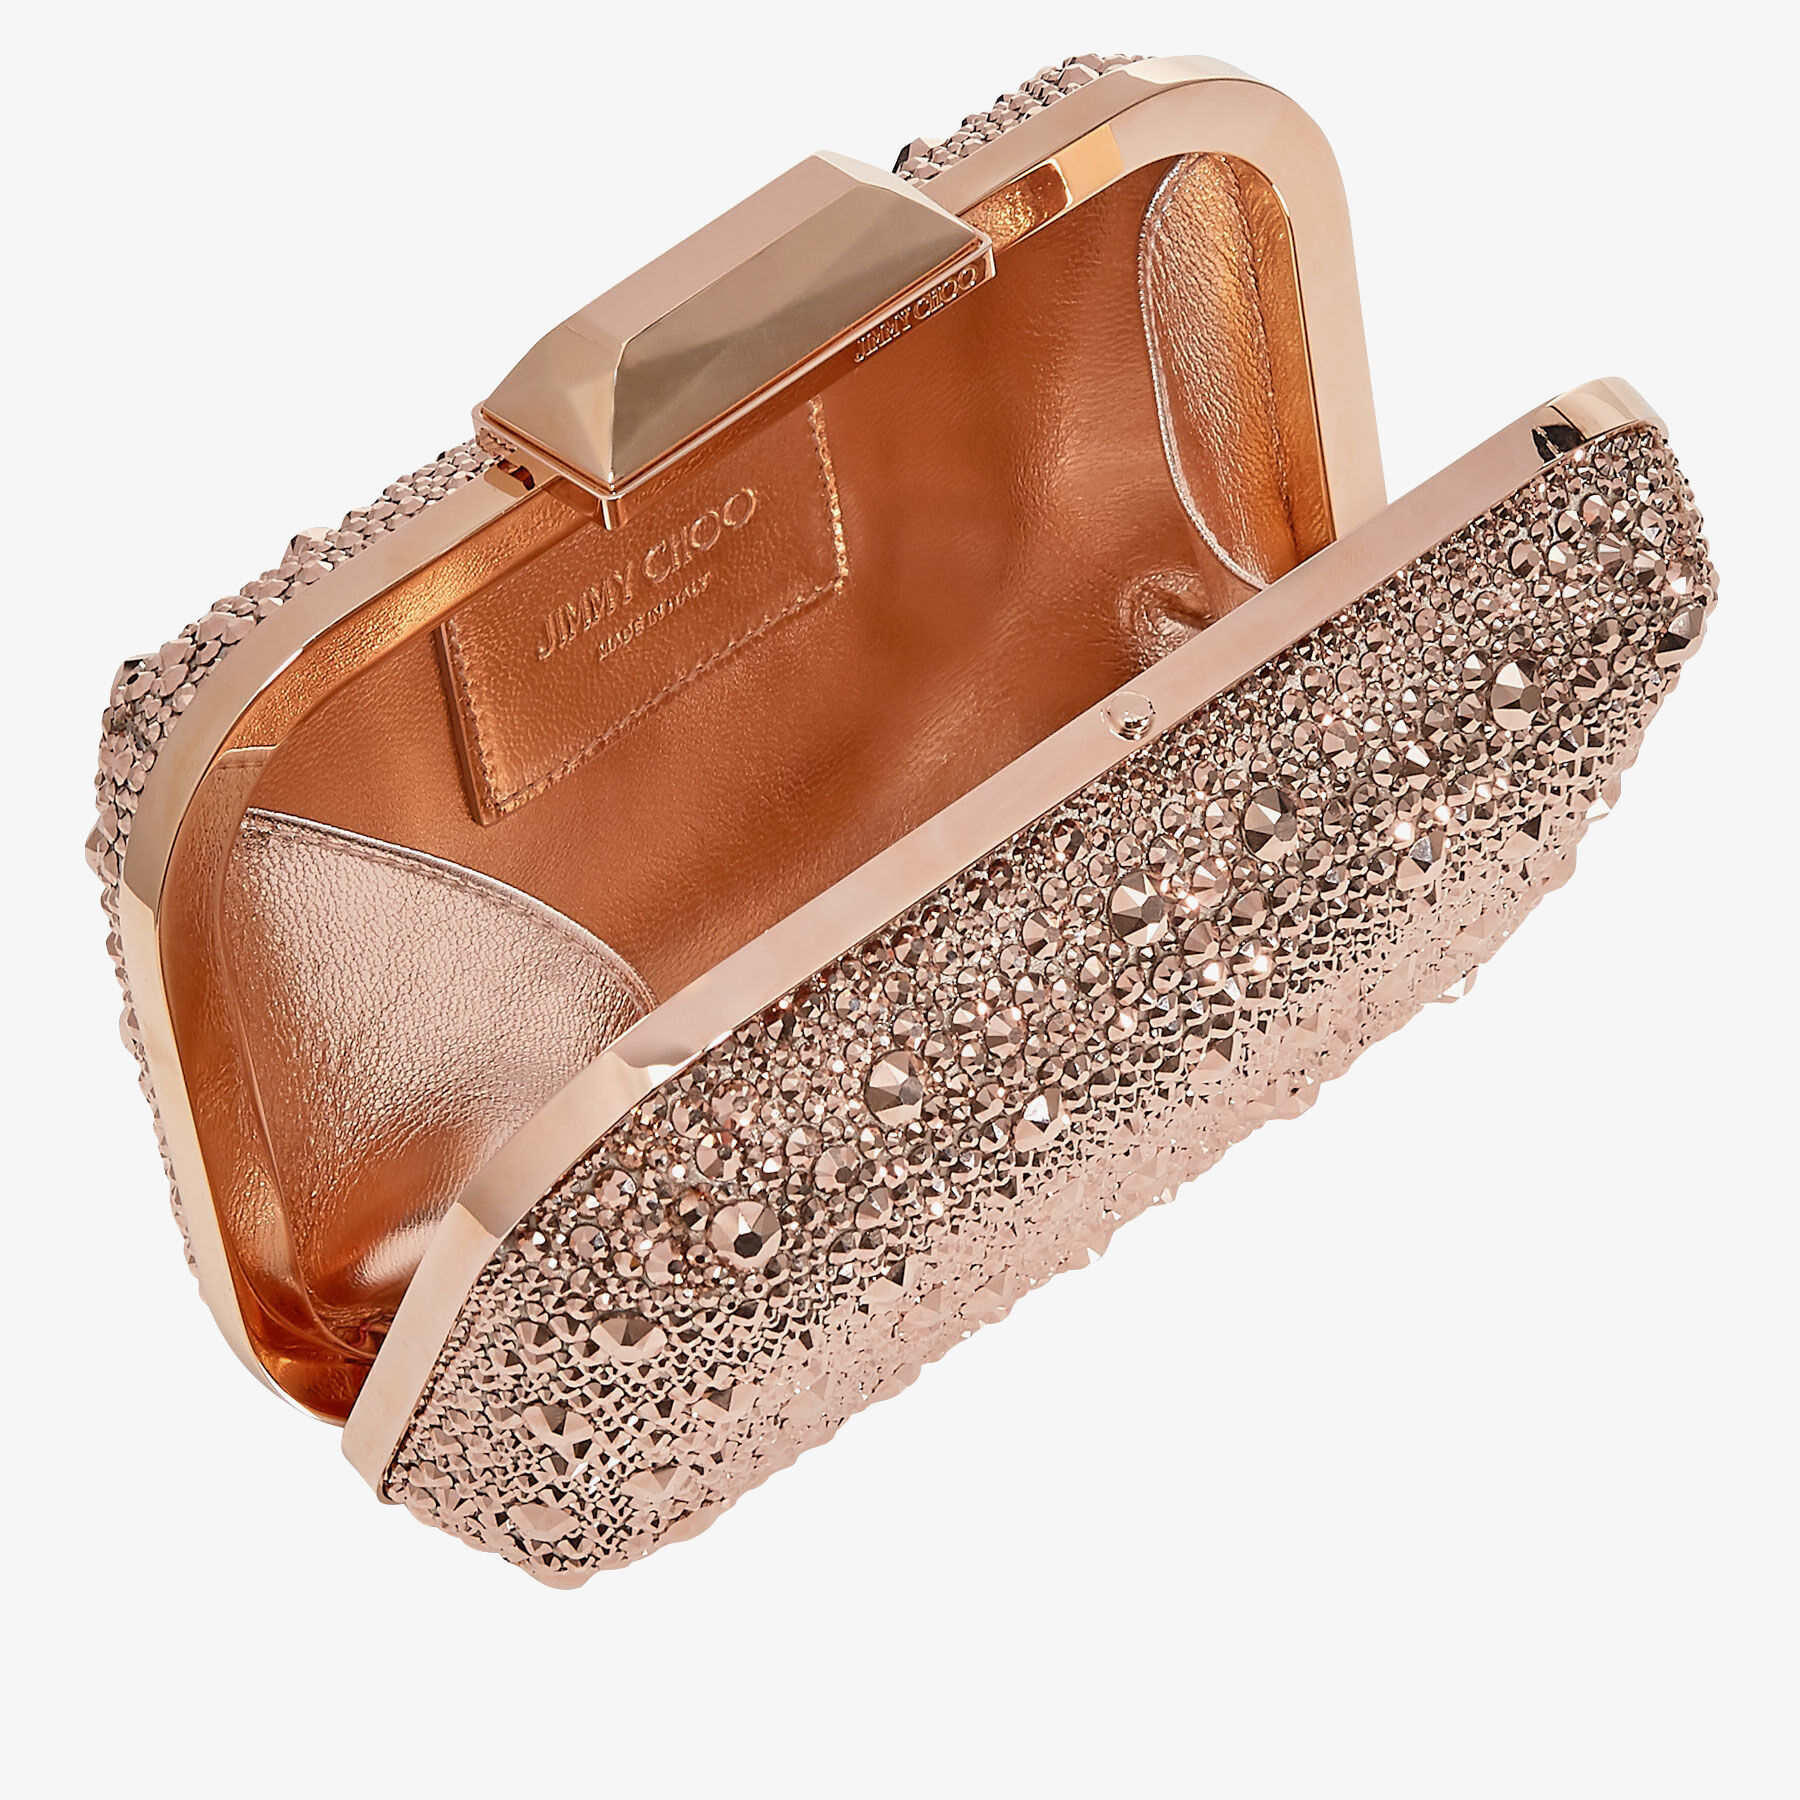 Rose Gold Crystal Covered Clutch Bag, Cloud, Pre Fall 18